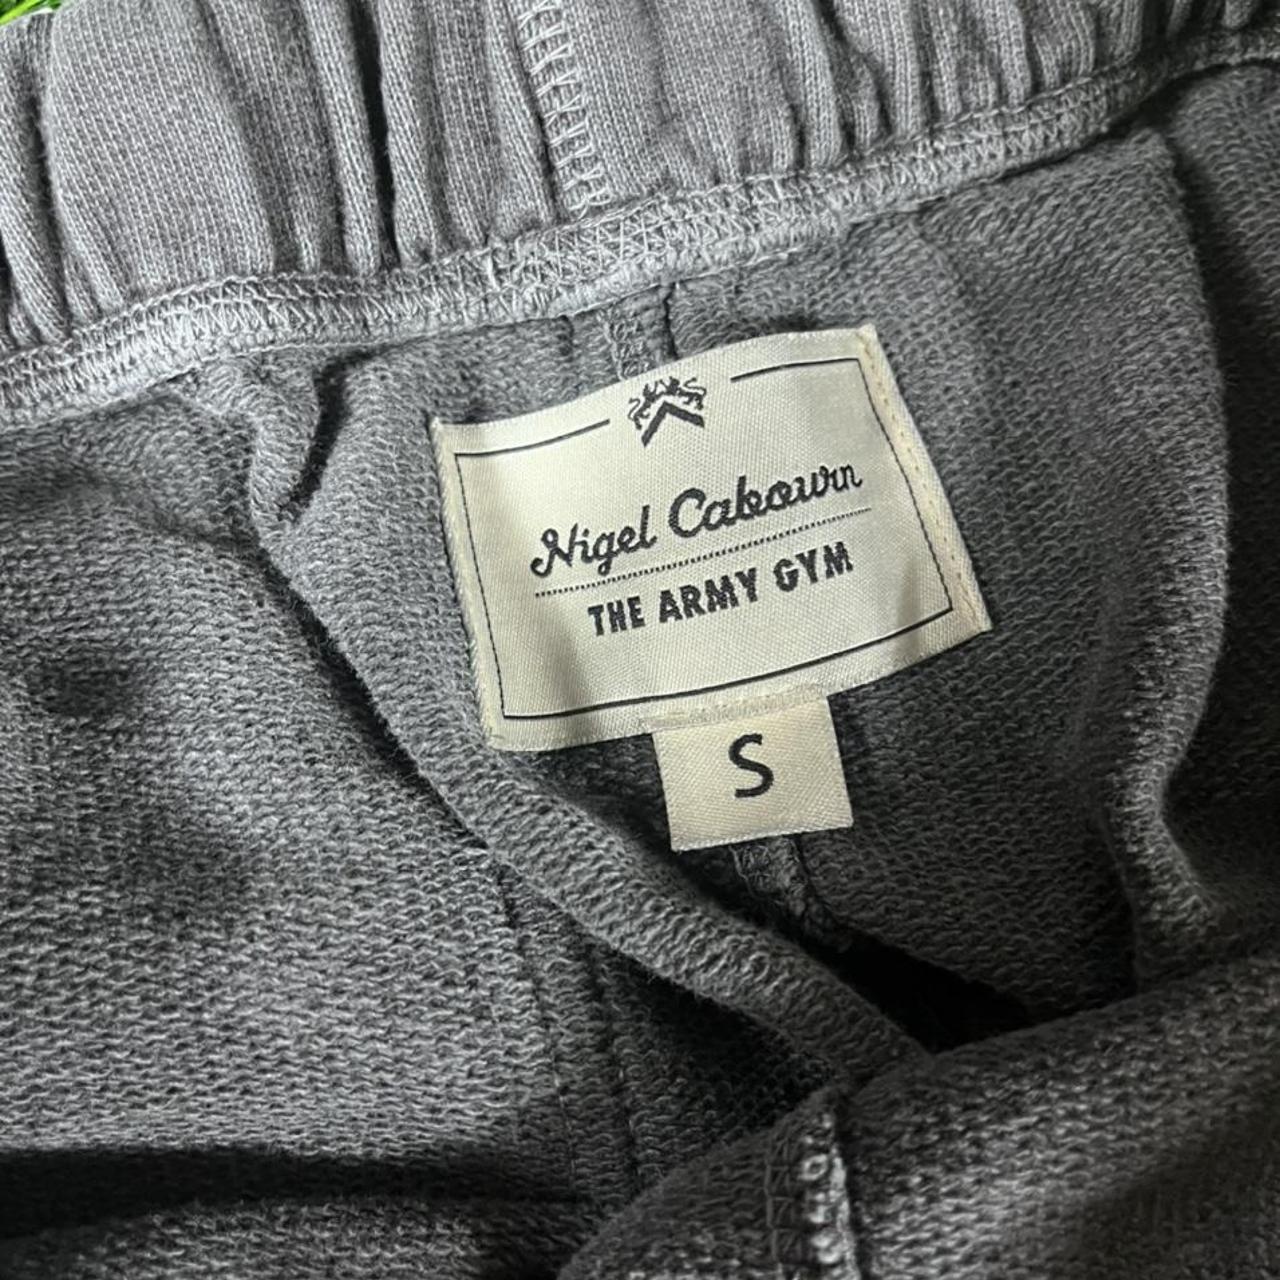 Product Image 2 - Nigel Cabourn Sweatpants

From "The Army